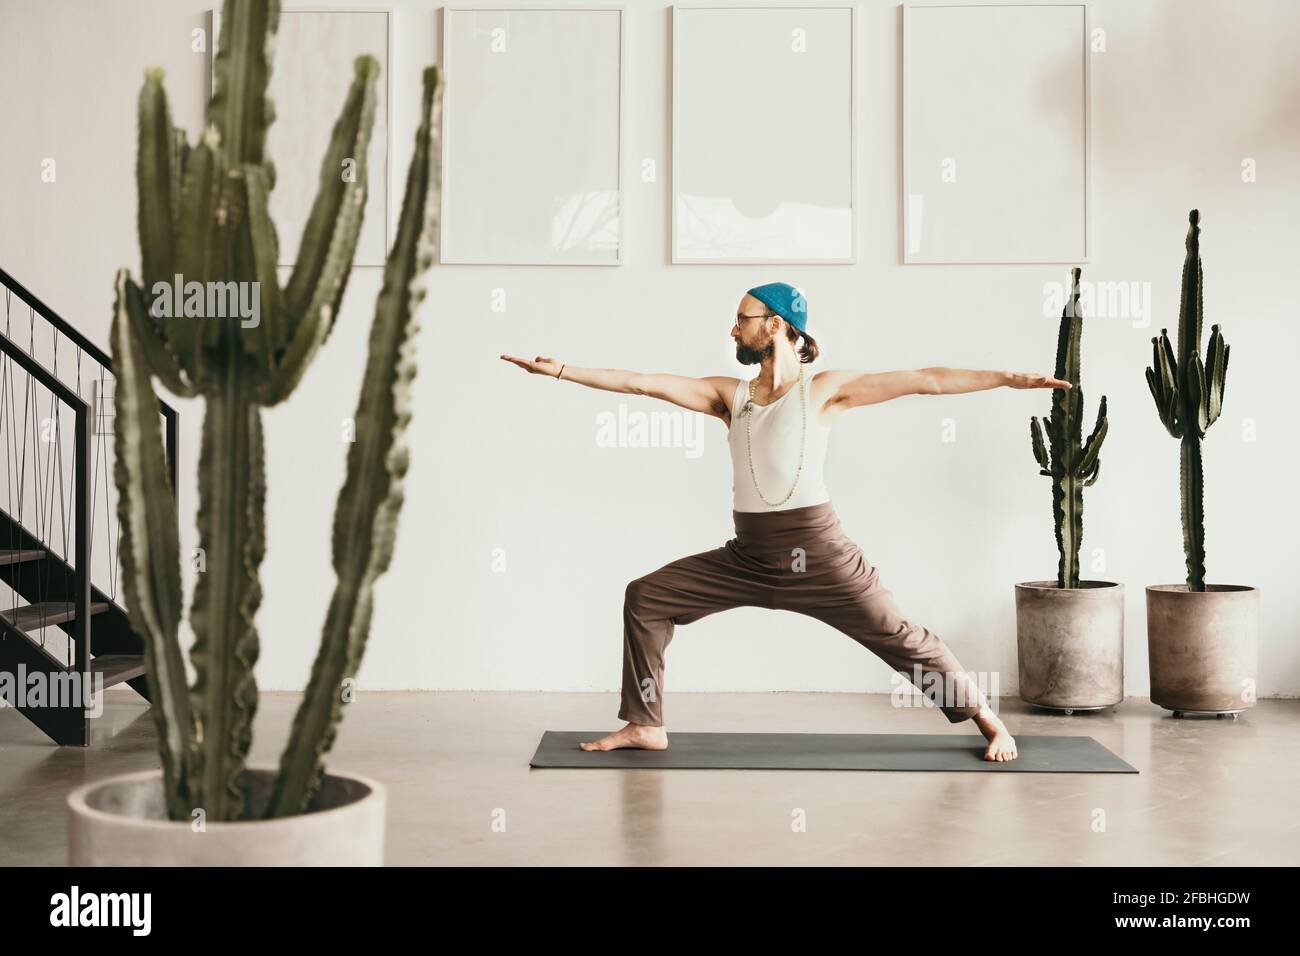 Male yoga teacher practicing with arms outstretched Stock Photo